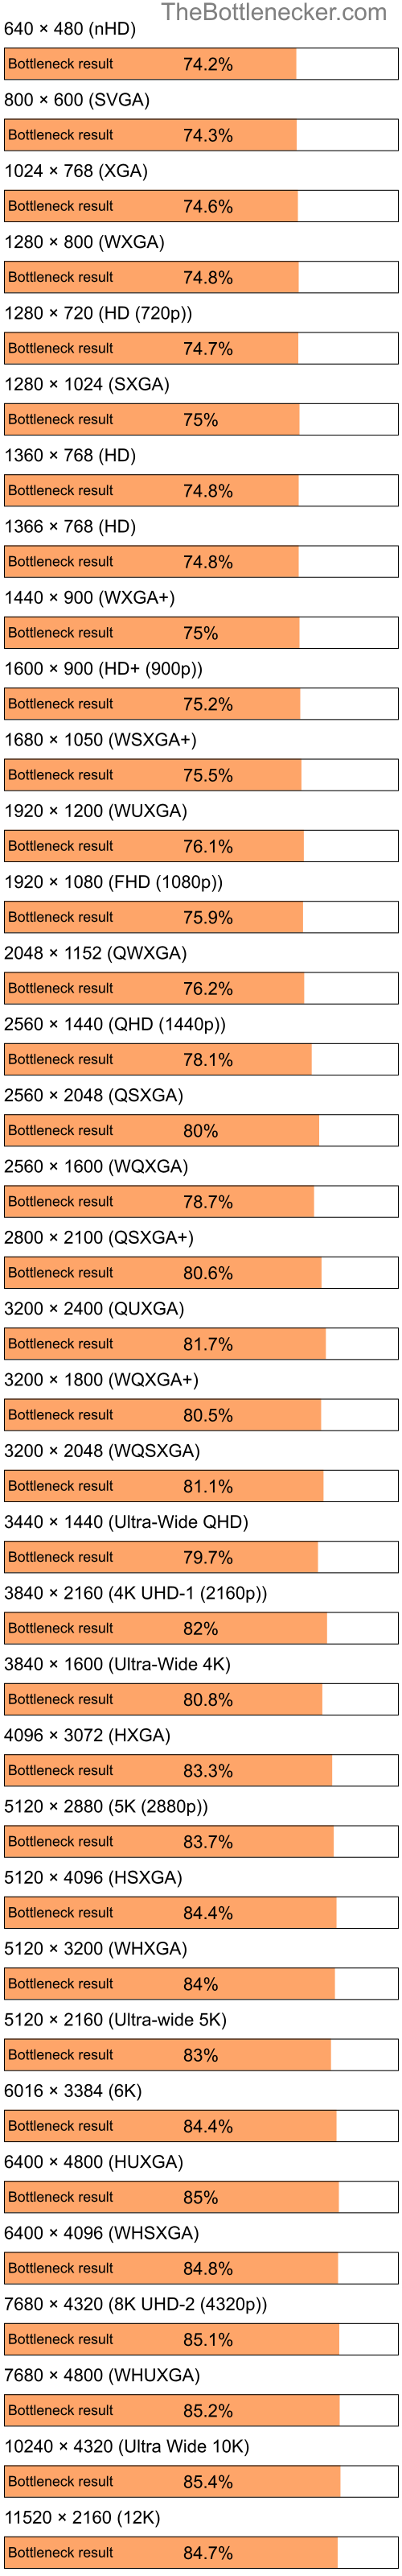 Bottleneck results by resolution for Intel Celeron M 420 and AMD Mobility Radeon X1350 in General Tasks